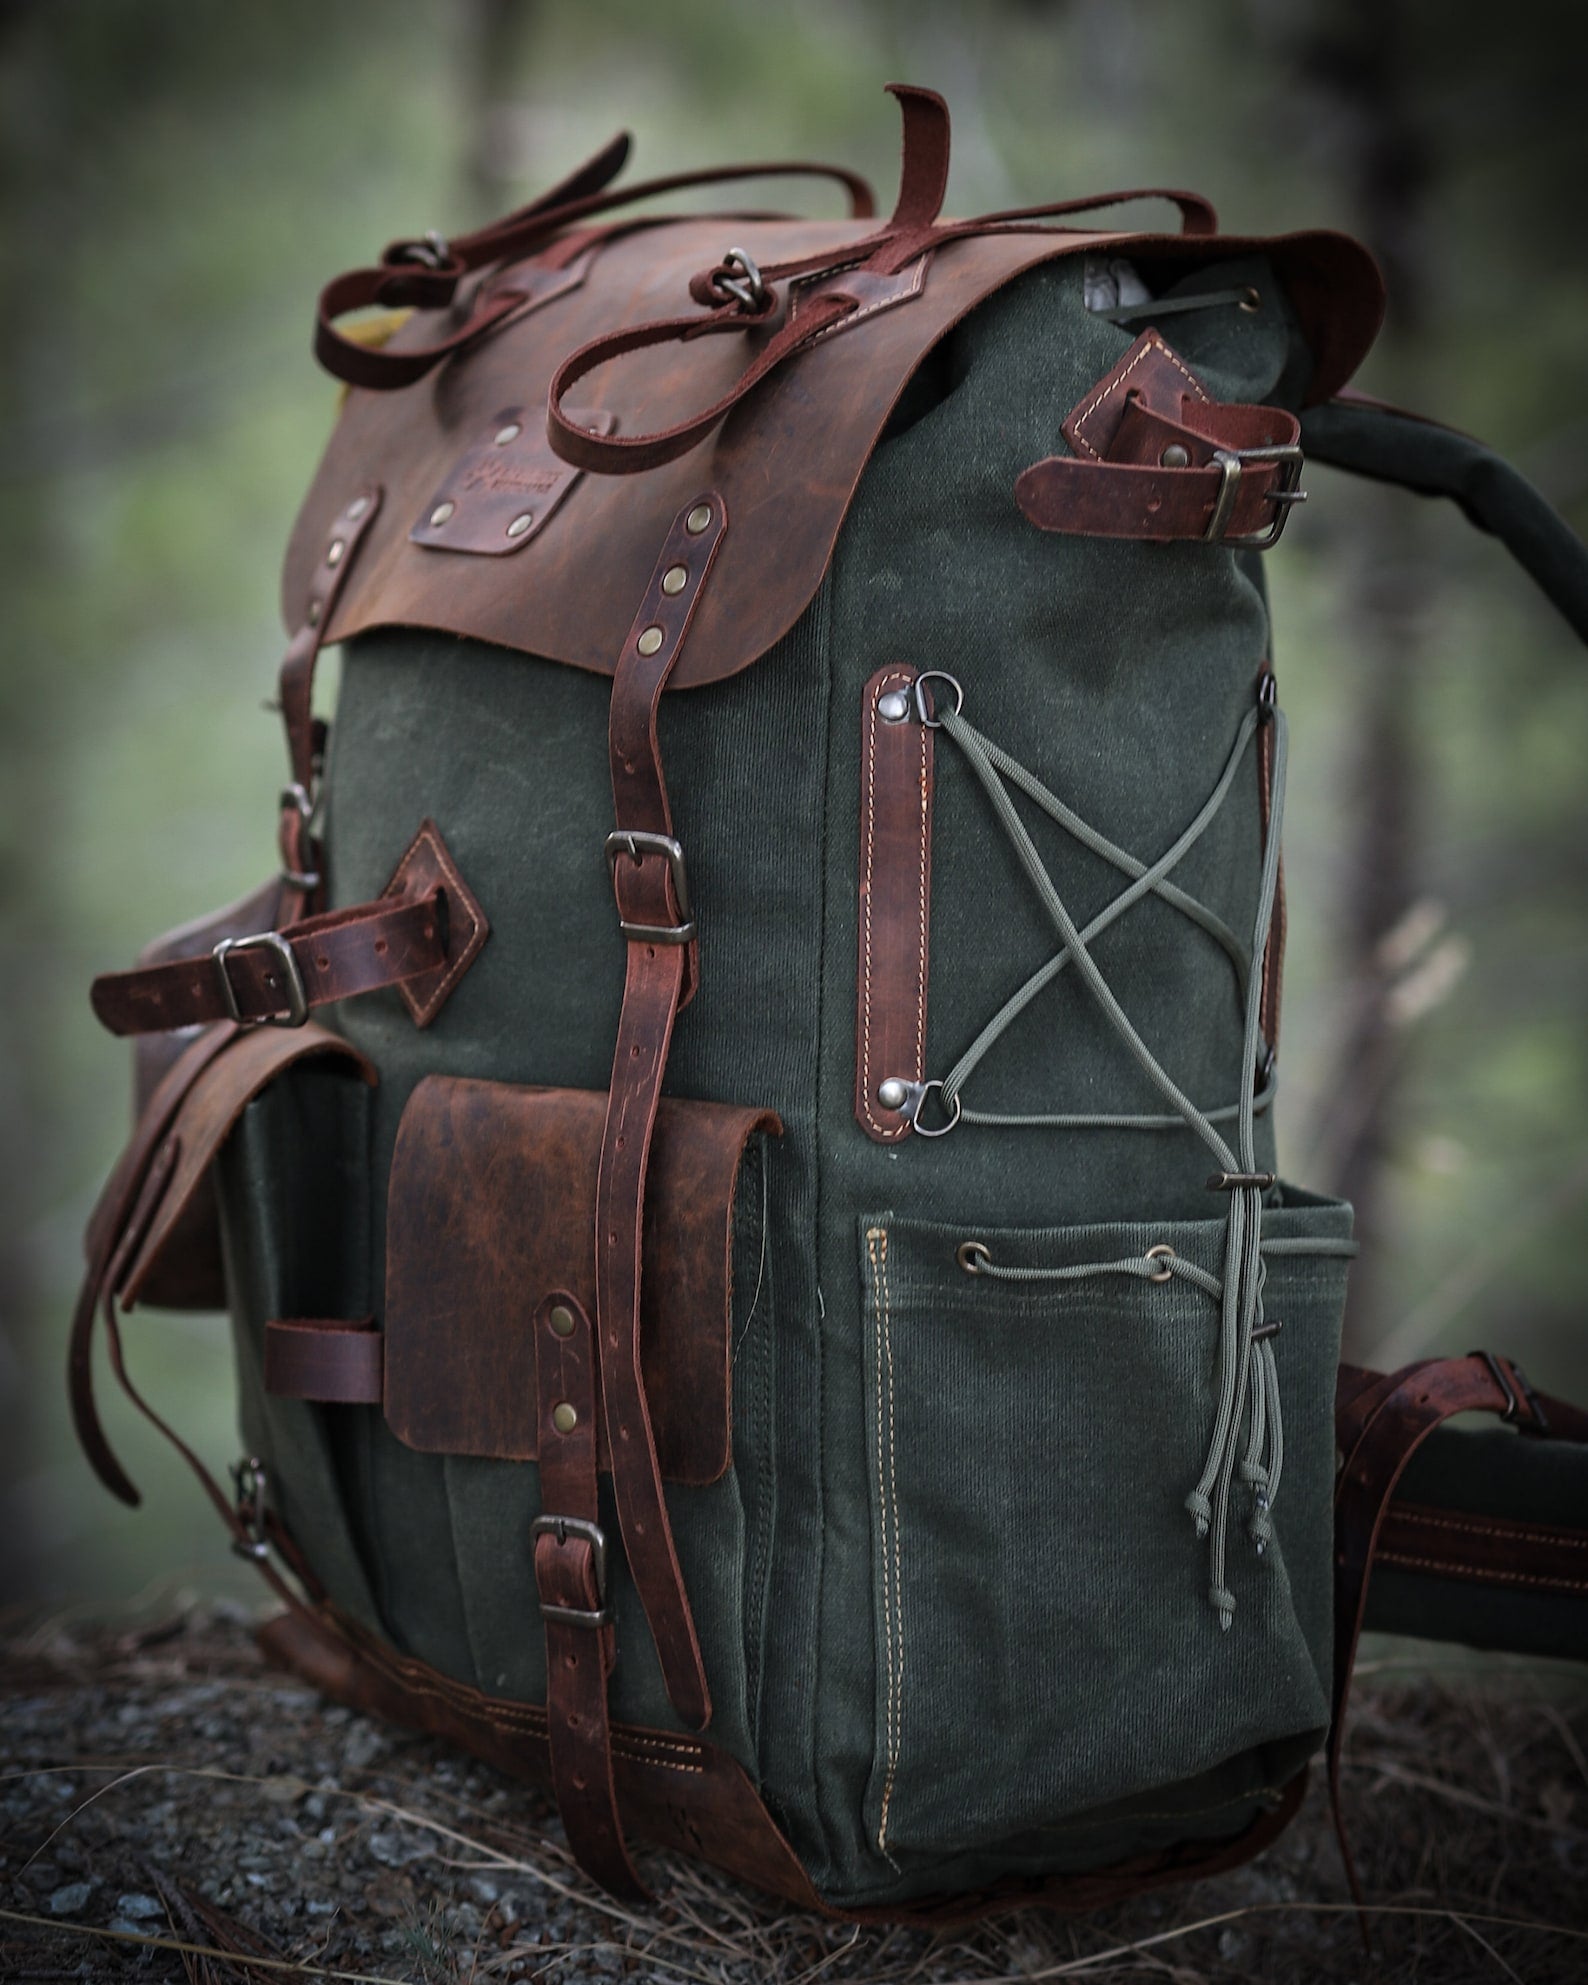 Limited Bestseller Handmade Genuine Leather and Waxed Canvas Backpack for Travel, Camping, Green, Brown options | 50 Liters |Personalization Backpack,rucksack 99percenthandmade   